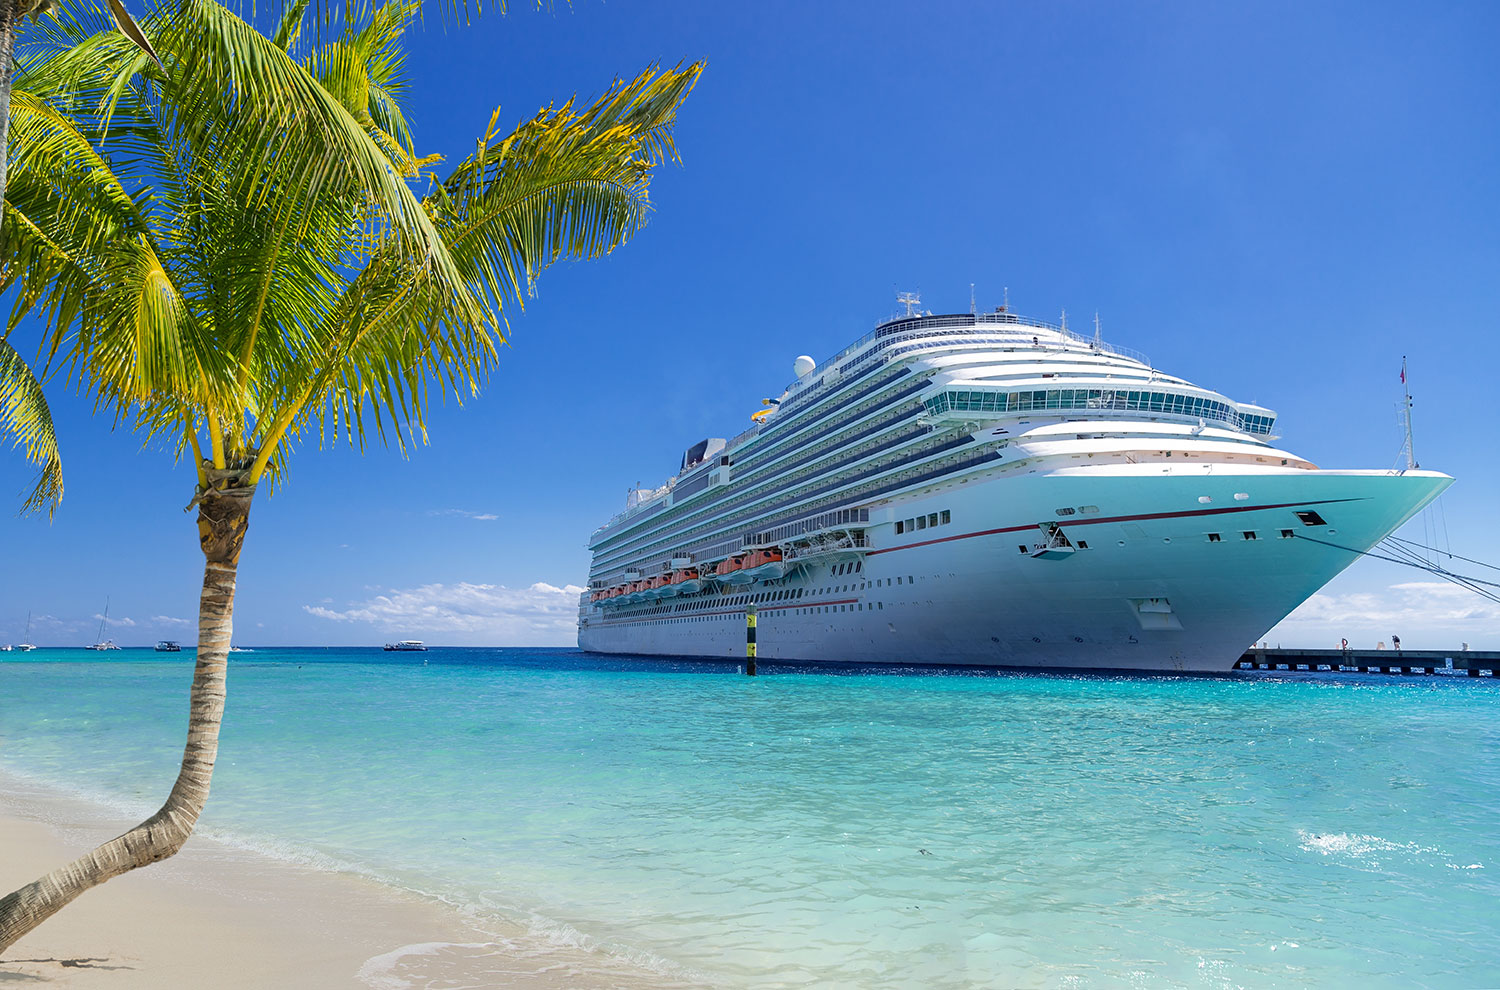 over 1000 systems installed on cruise ships worldwide